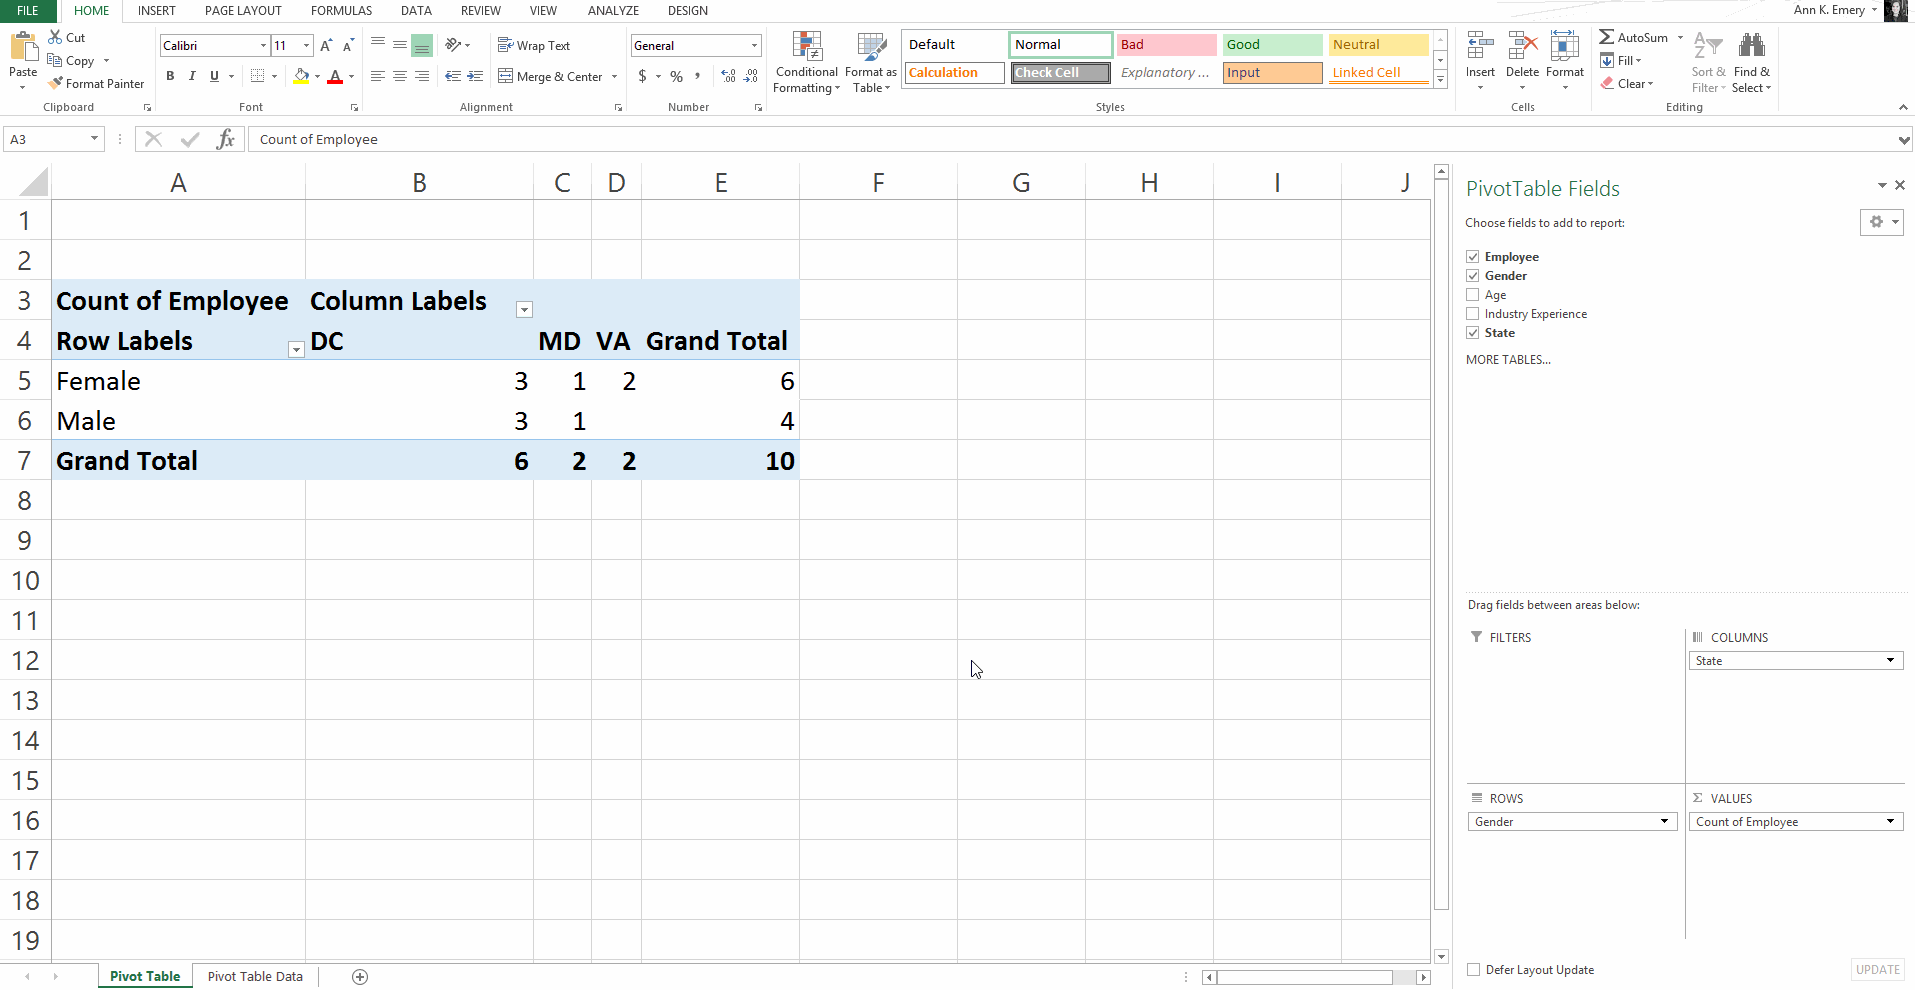 drag State into the Rows box, right below Gender. The tallies in the pivot table on the left update themselves accordingly.